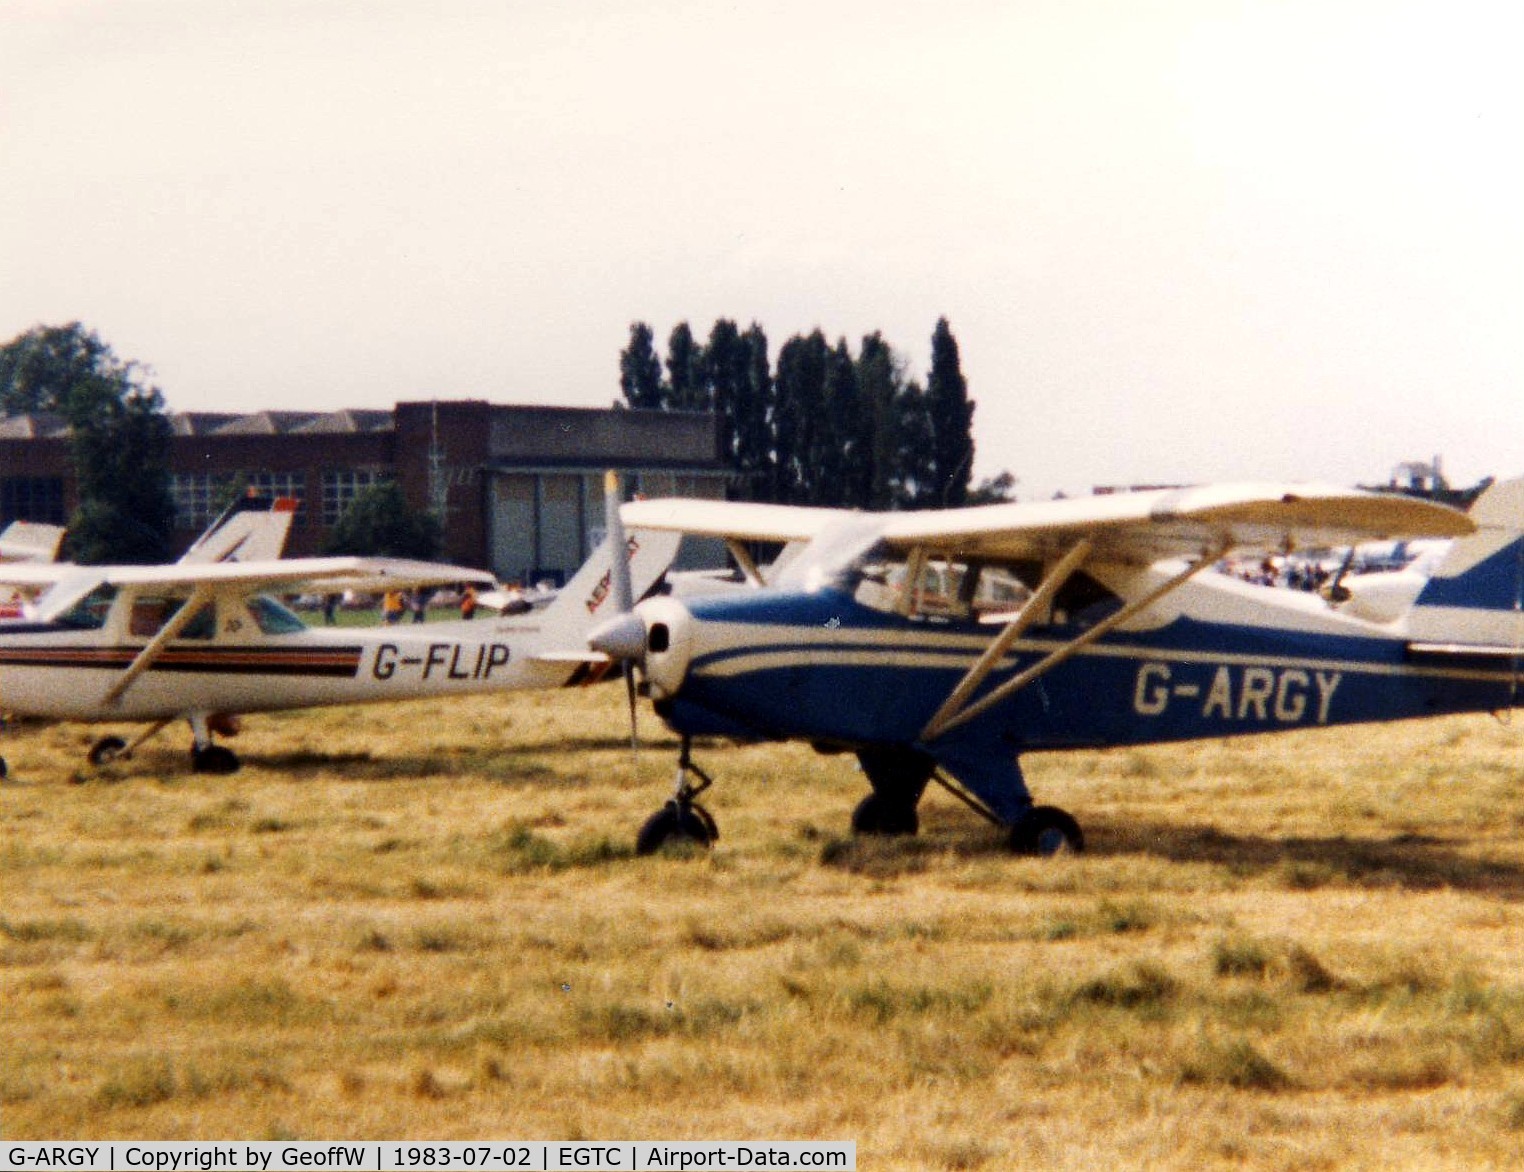 G-ARGY, 1960 Piper PA-22-160(TD) Tri Pacer C/N 22-7620, PA-22 Tri-Pacer 160 G-ARGY attending the 1983 PFA Rally at Cranfield